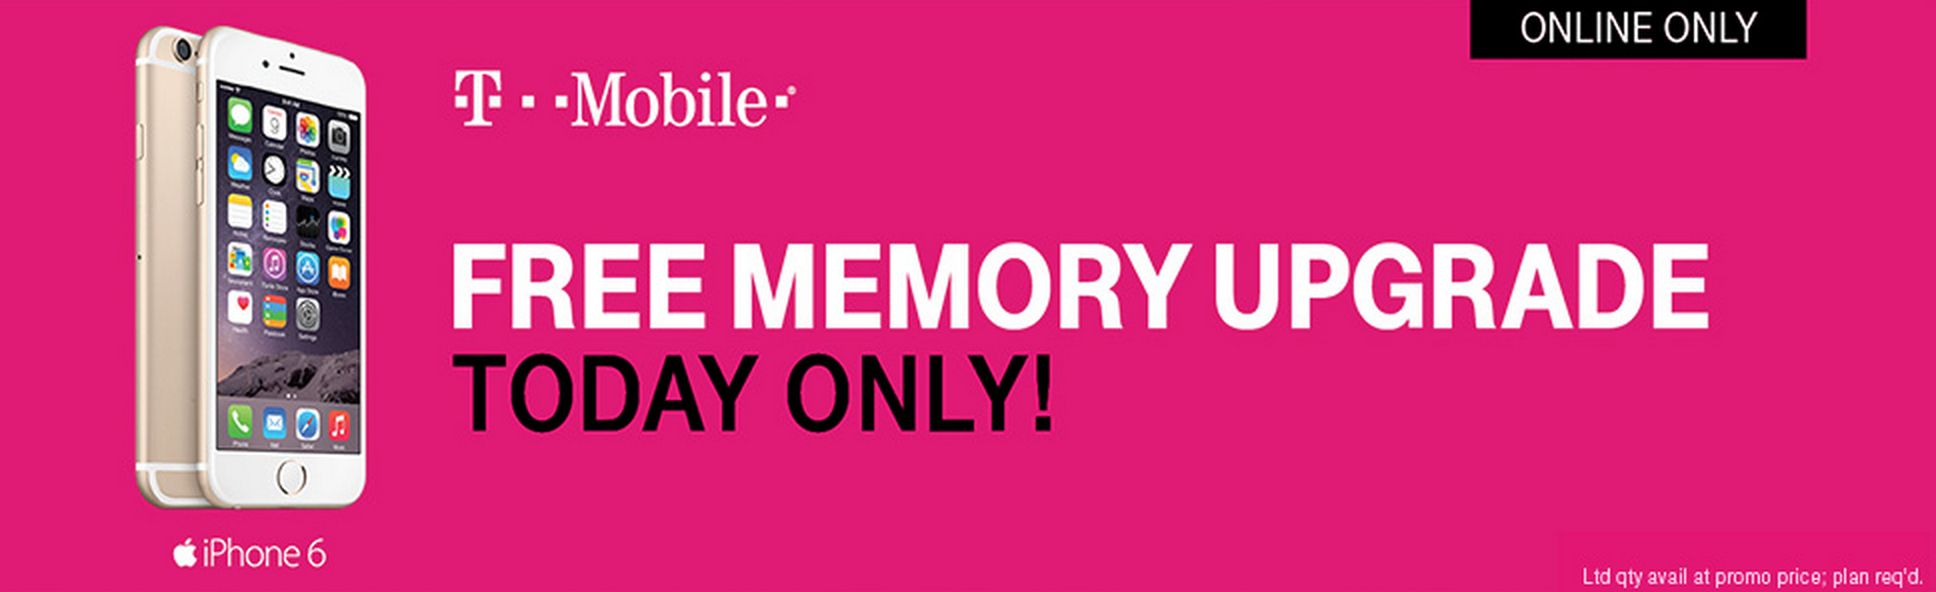 TMobile cuts iPhone pricing for Cyber Monday, 64GB iPhone 6 100 off